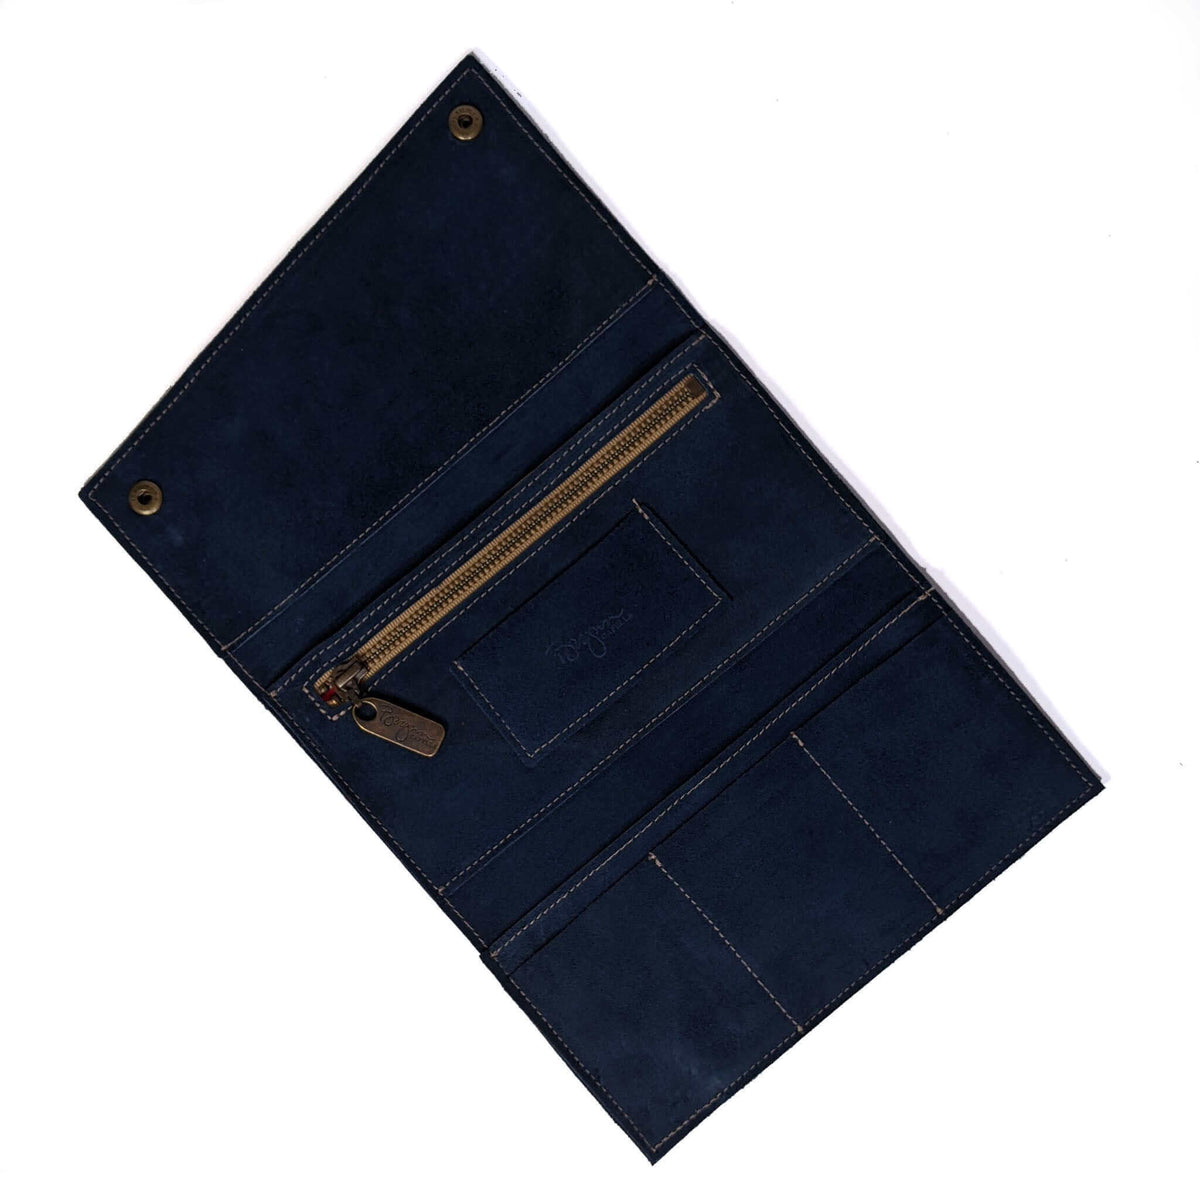 Leather Tri-fold Wallet - Blue Suede - Brynn Capella, leather accessories, usa